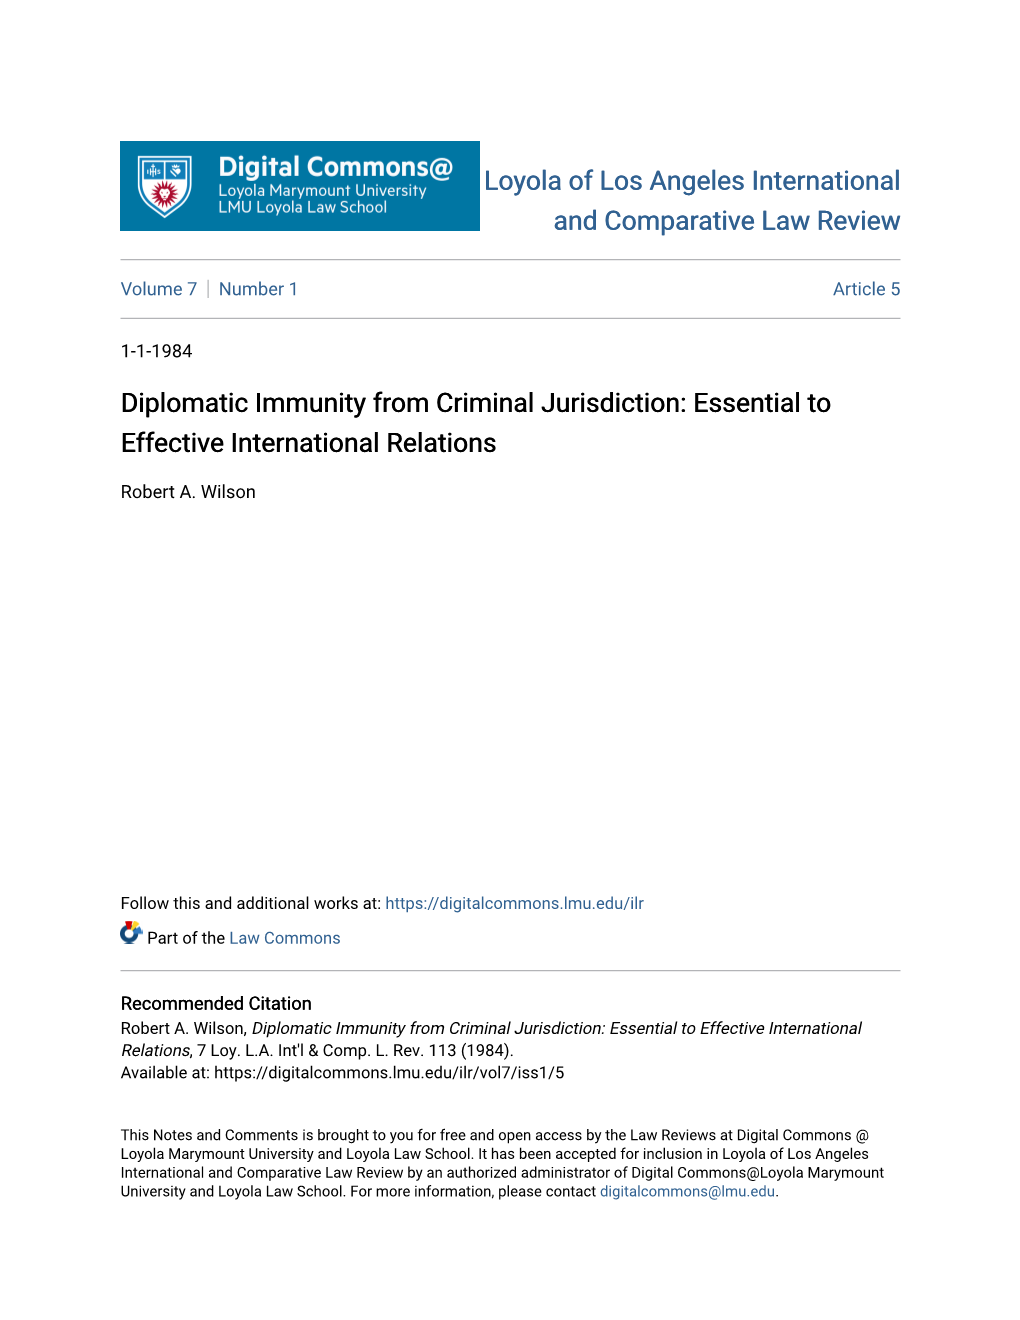 Diplomatic Immunity from Criminal Jurisdiction: Essential to Effective International Relations